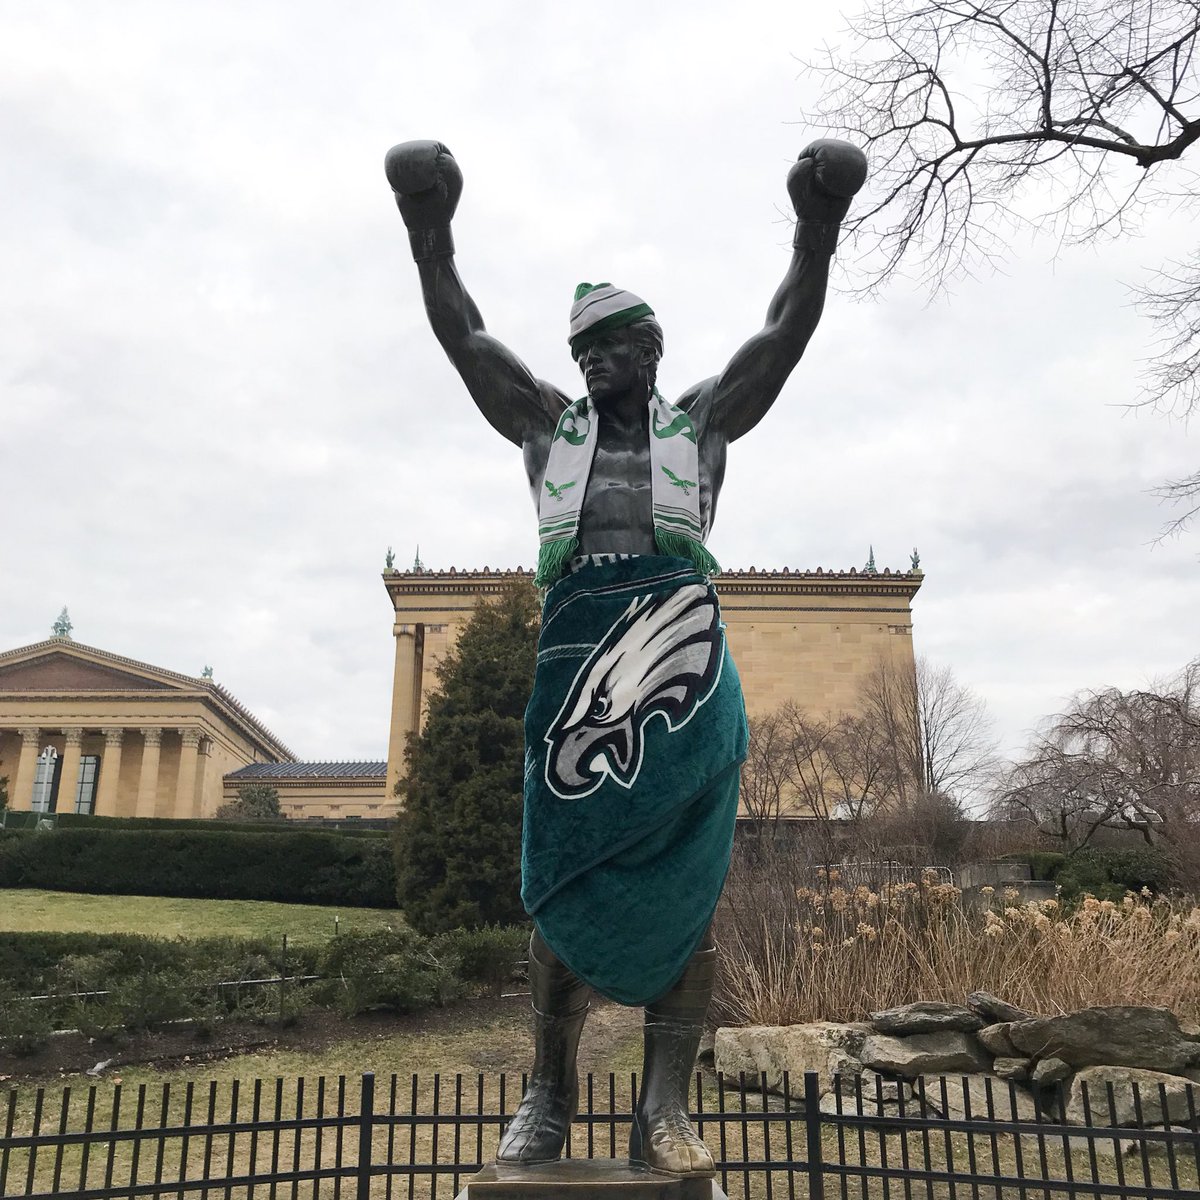 BEFORE & AFTER: @Eagles fans have rightfully returned the Rocky statue to its former glory 🙌🏽 bit.ly/2F2ICDz